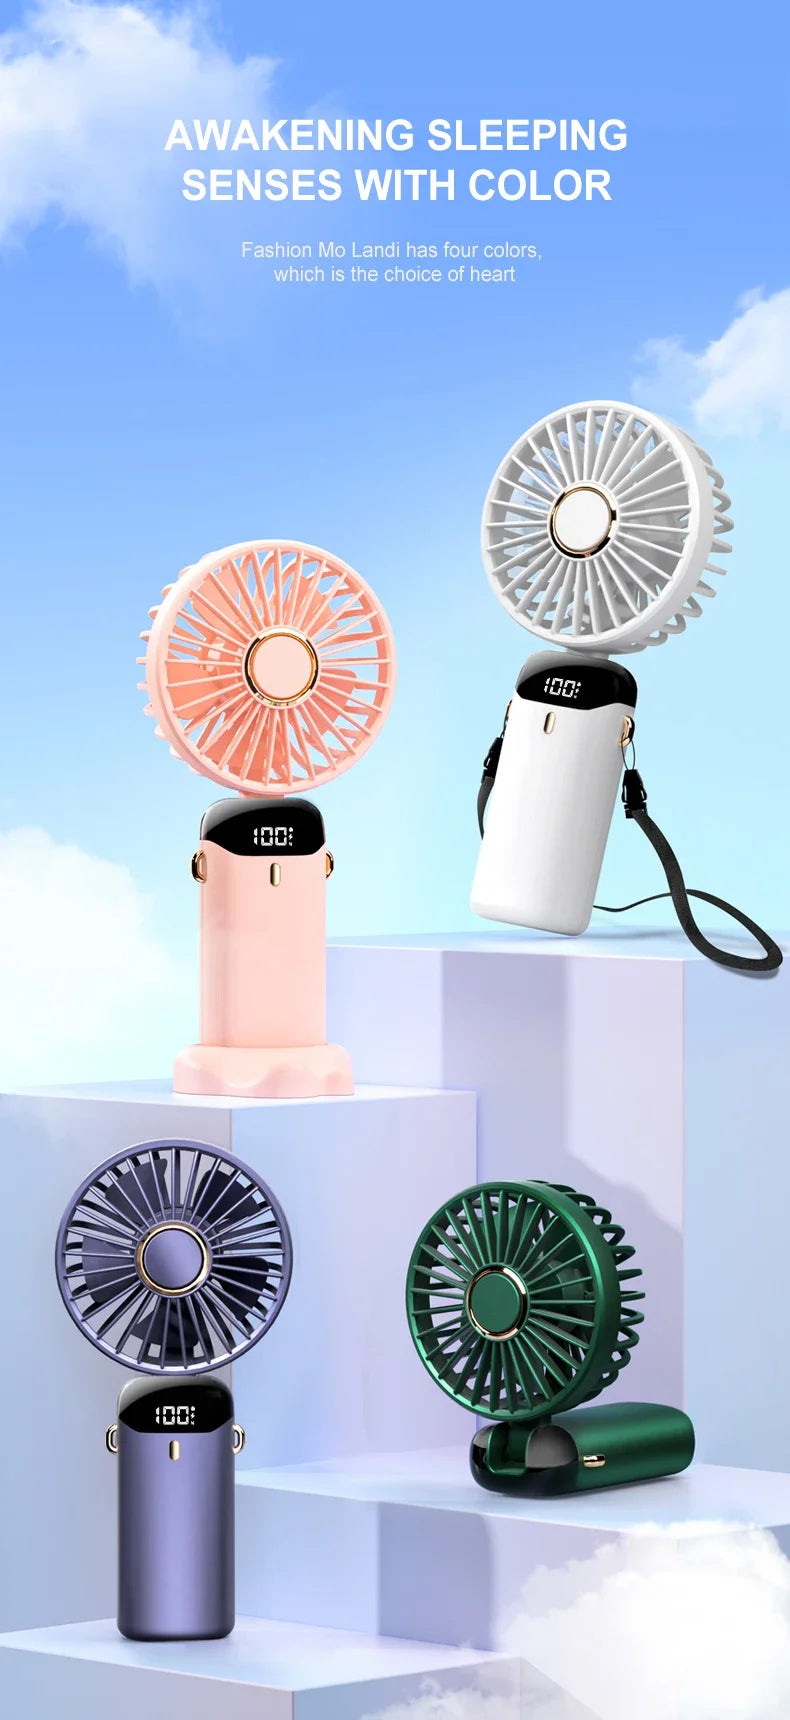 ENYEAR™ USB Handheld Twisted Head Mini Fan Showing Real-Time